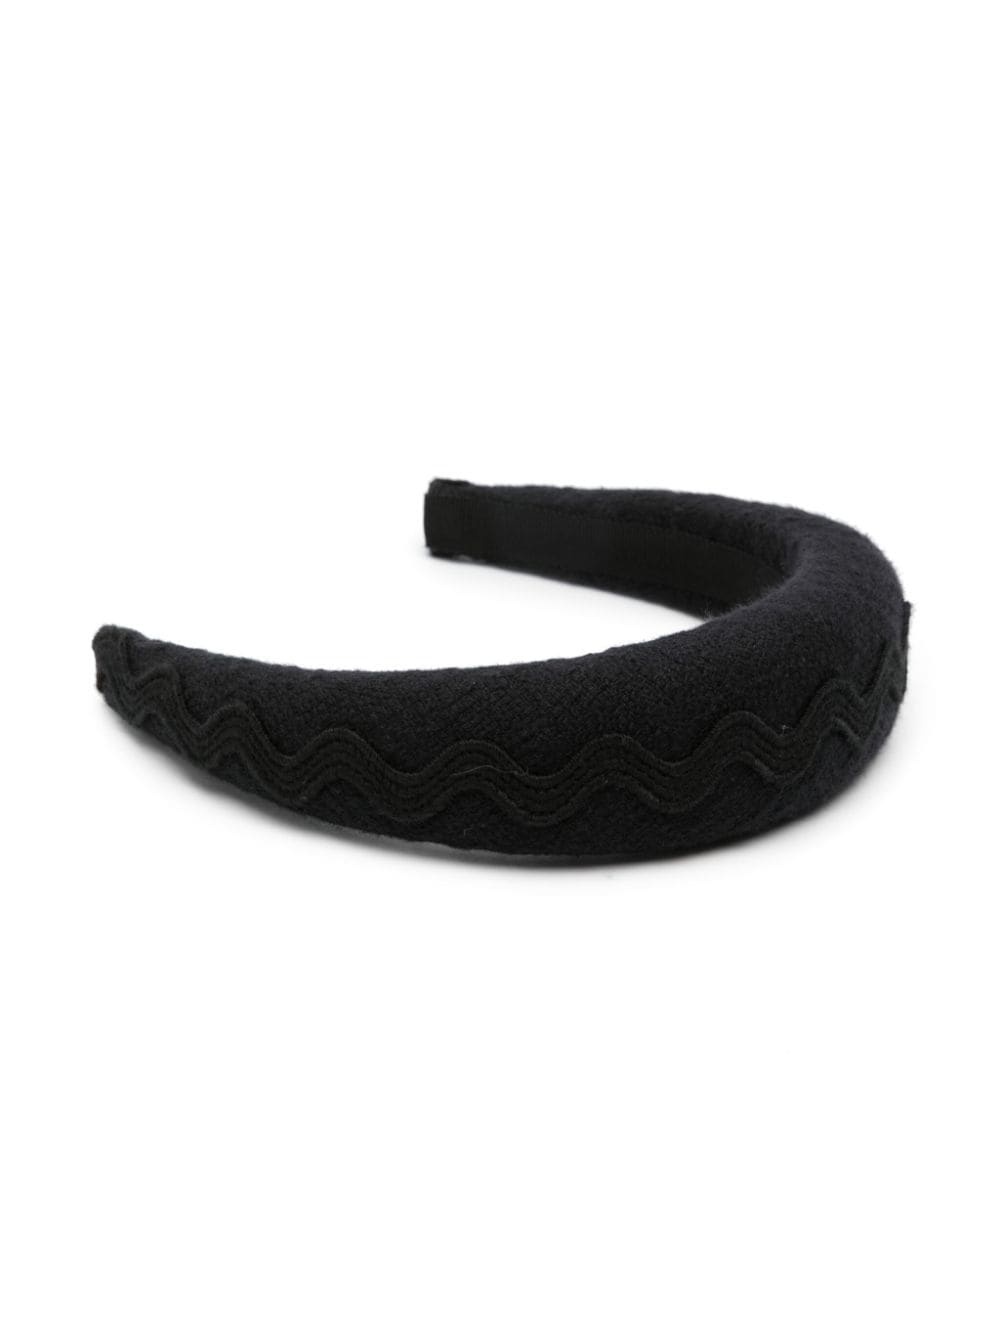 intertwined cotton head band - 2